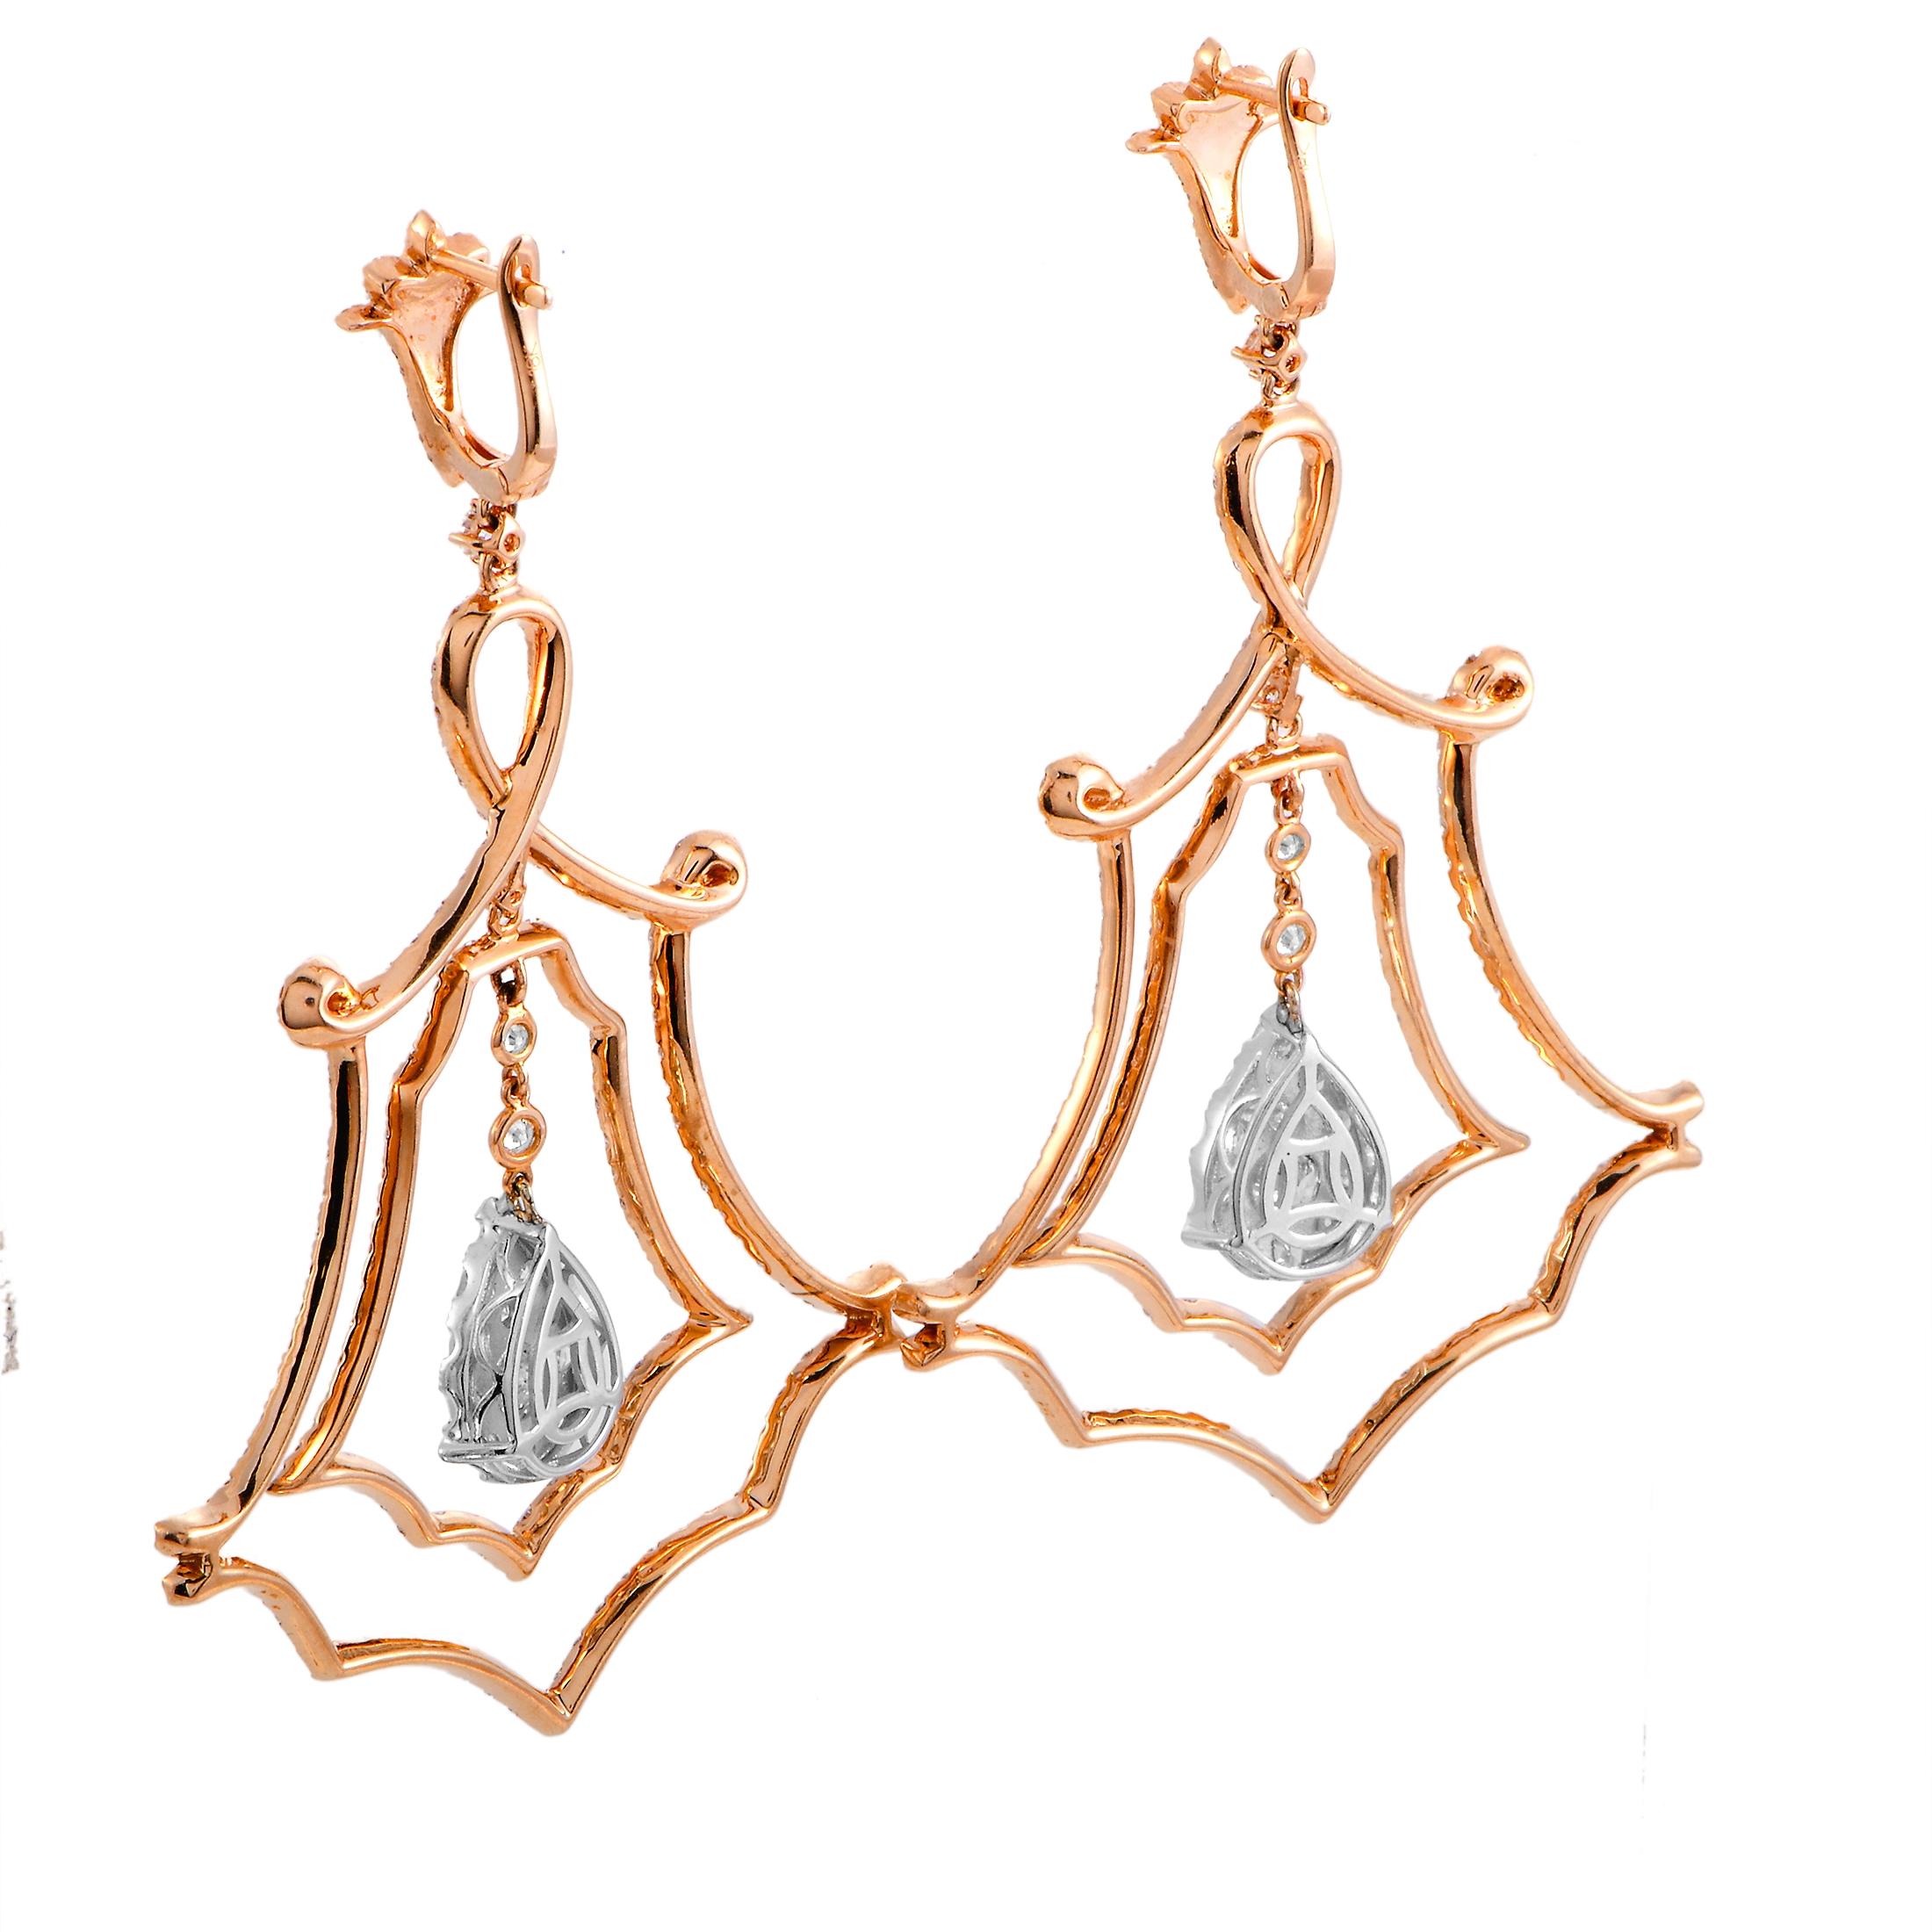 These LB Exclusive earrings are crafted from 18K rose gold and each of the two weighs 11.1 grams, measuring 3” in length and 2” in width. The earrings are embellished with a total of 5.25 carats of diamonds.

This pair of earrings is offered in